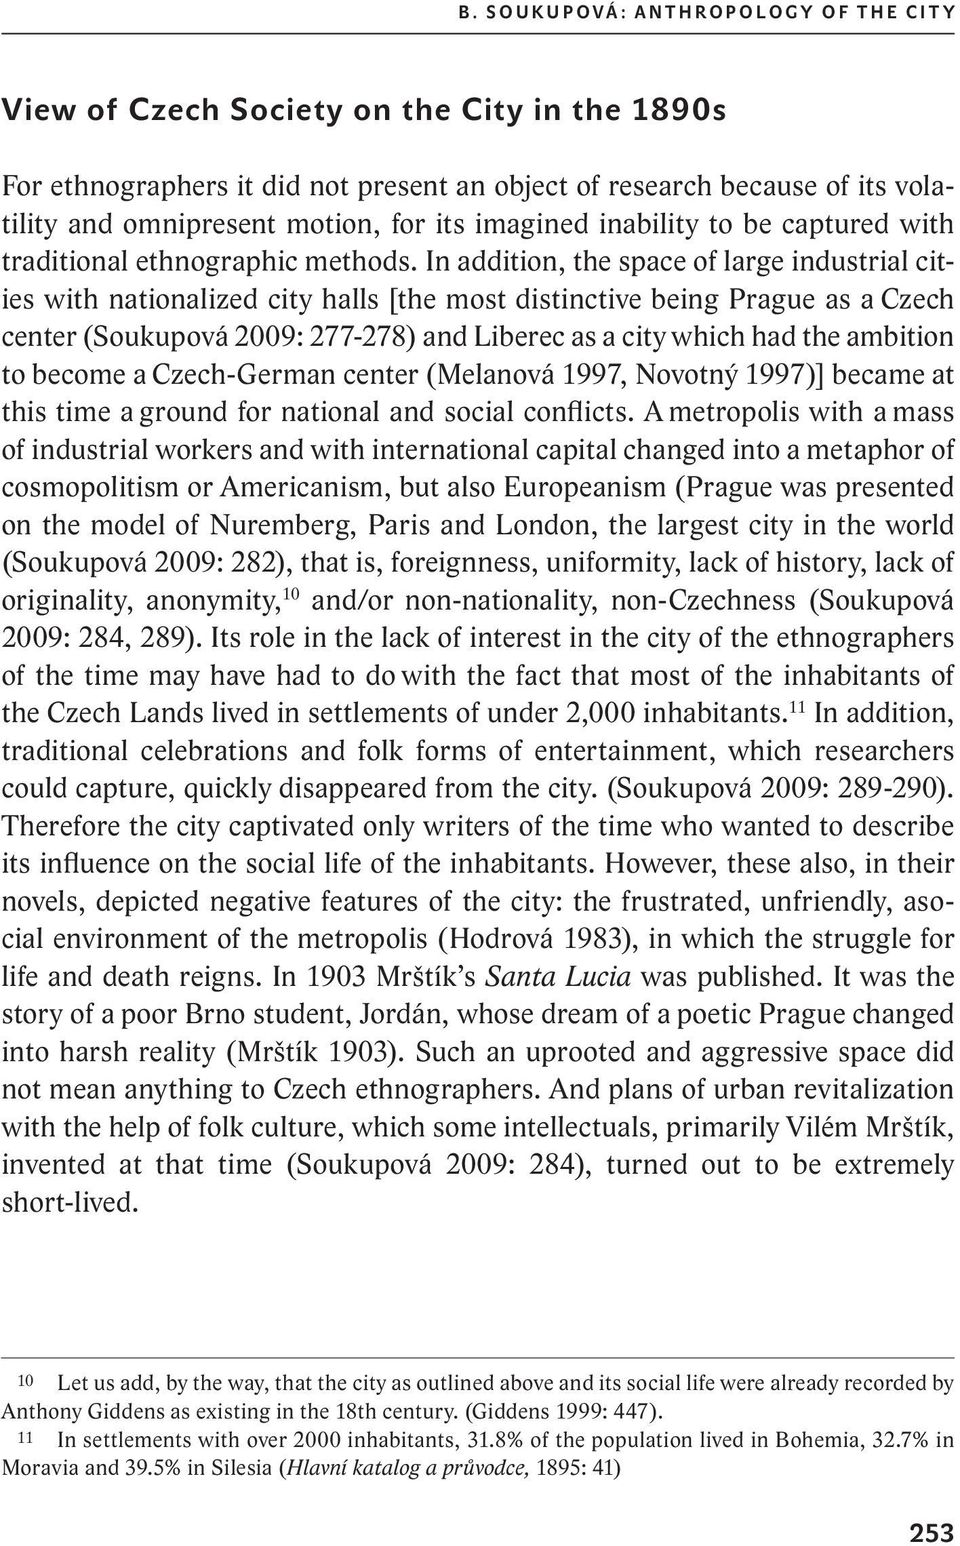 in addition, the space of large industrial cities with nationalized city halls [the most distinctive being Prague as a Czech center (Soukupová 2009: 277-278) and Liberec as a city which had the